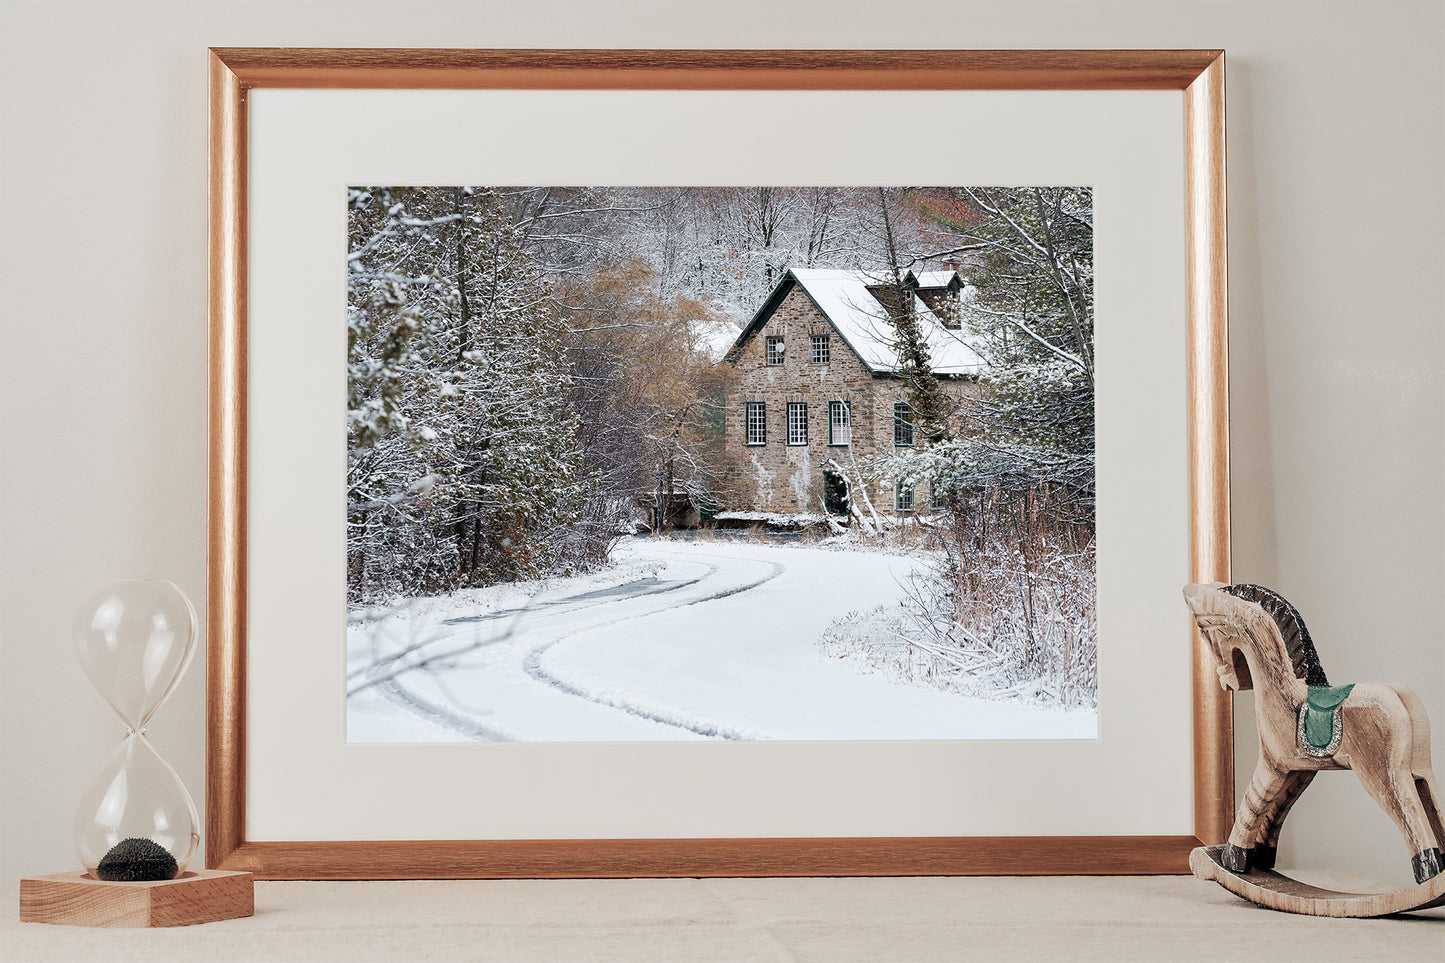 Photographic Print: "Bedford Mills First Snow"